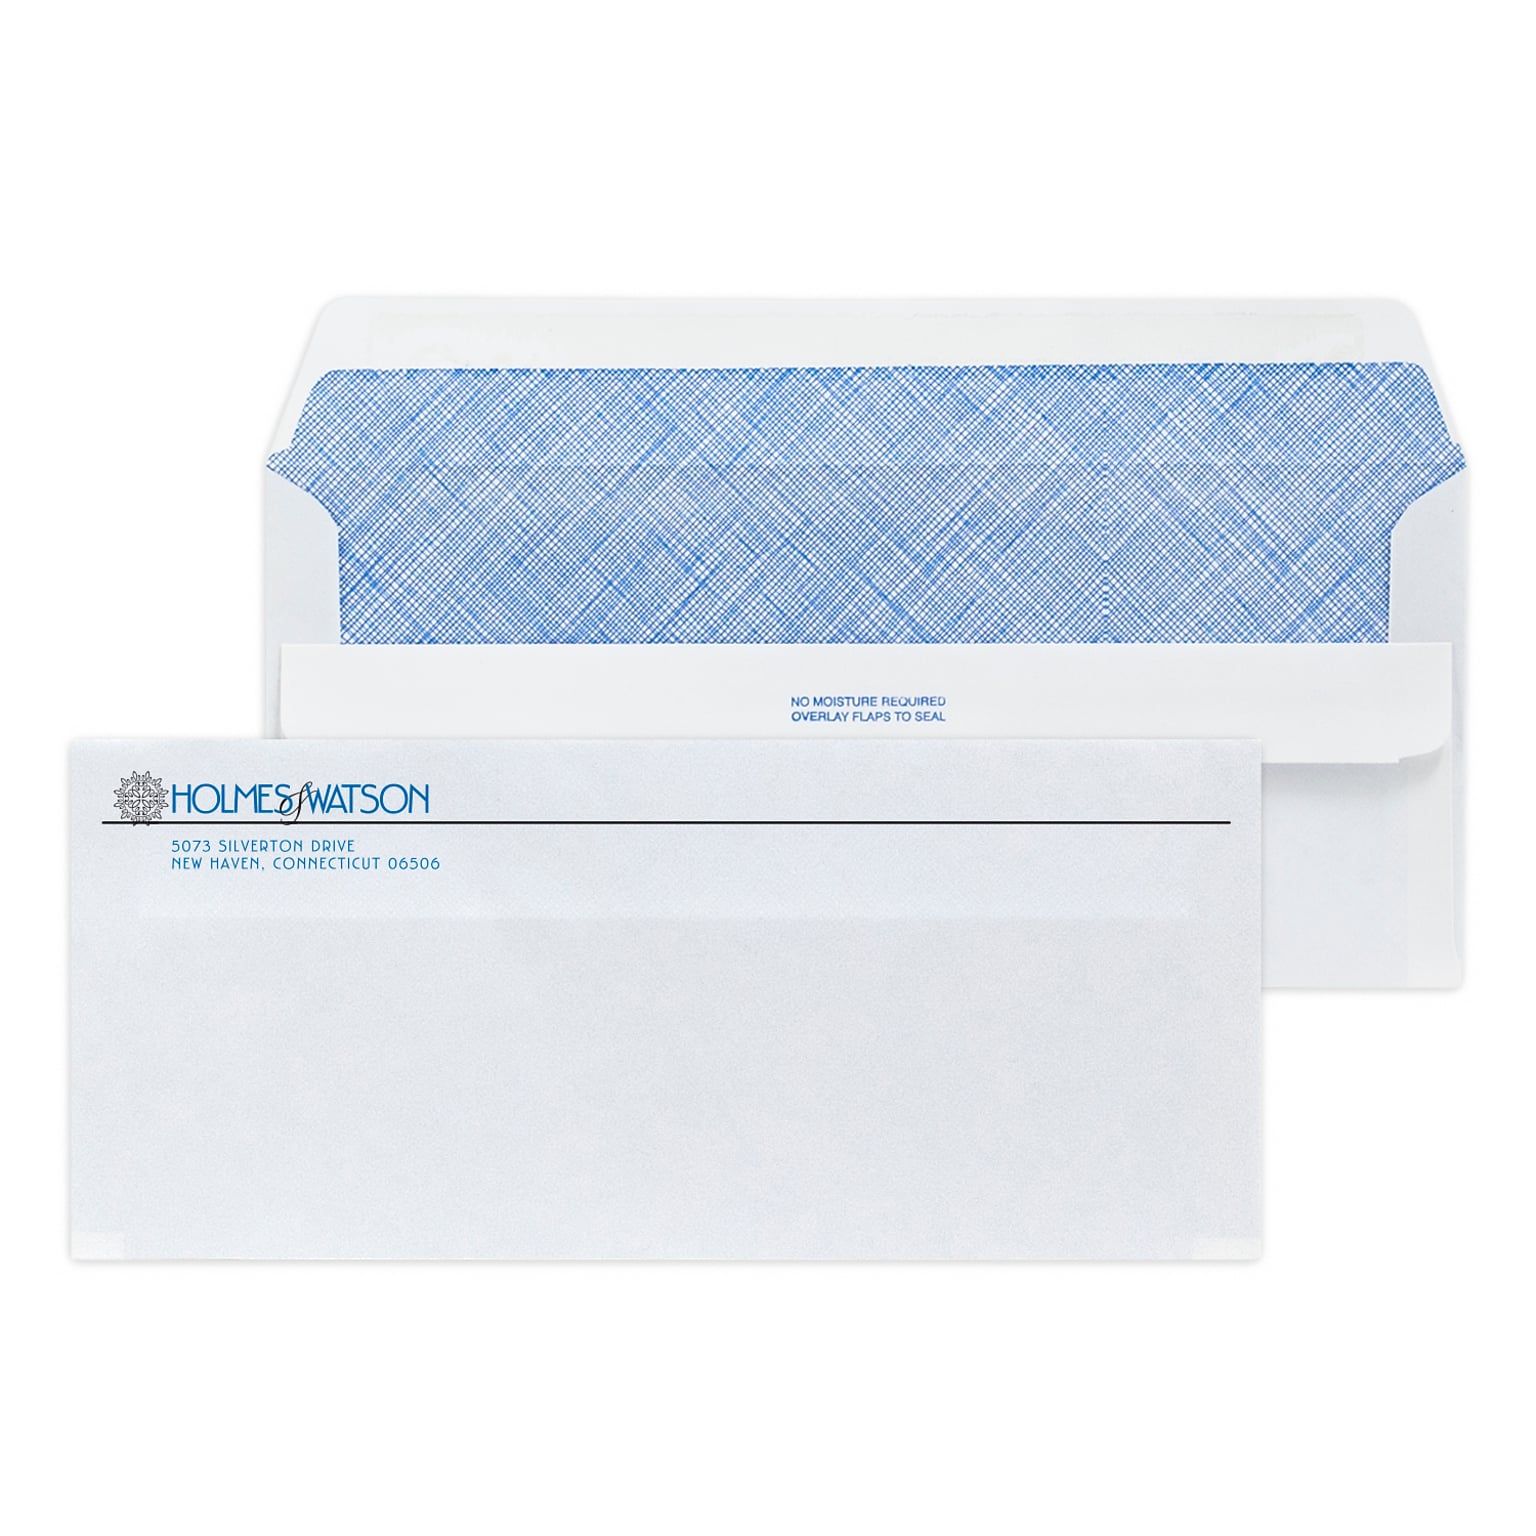 Custom #10 Self Seal Envelopes with Security Tint, 4 1/4 x 9 1/2, 24# White Wove, 2 Standard Inks, 250 / Pack